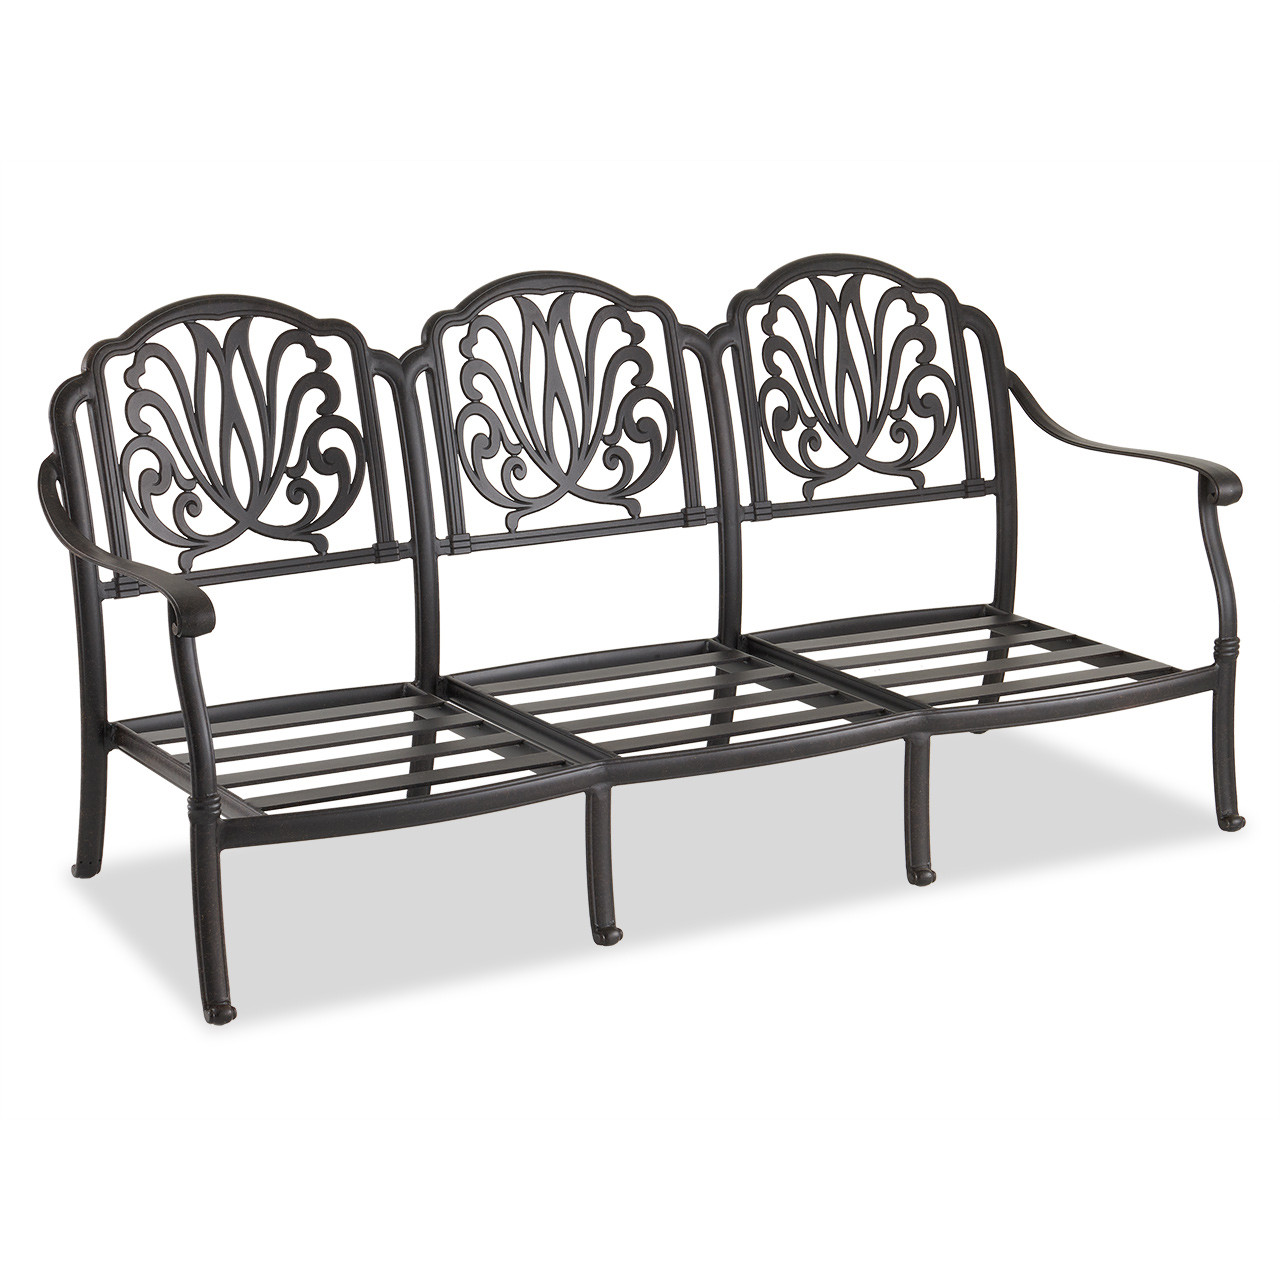 Cadiz Aged Bronze Cast Aluminum with Cushions 3 Pc. Sofa Group + Club Chair + 42 x 26 in. Coffee Table